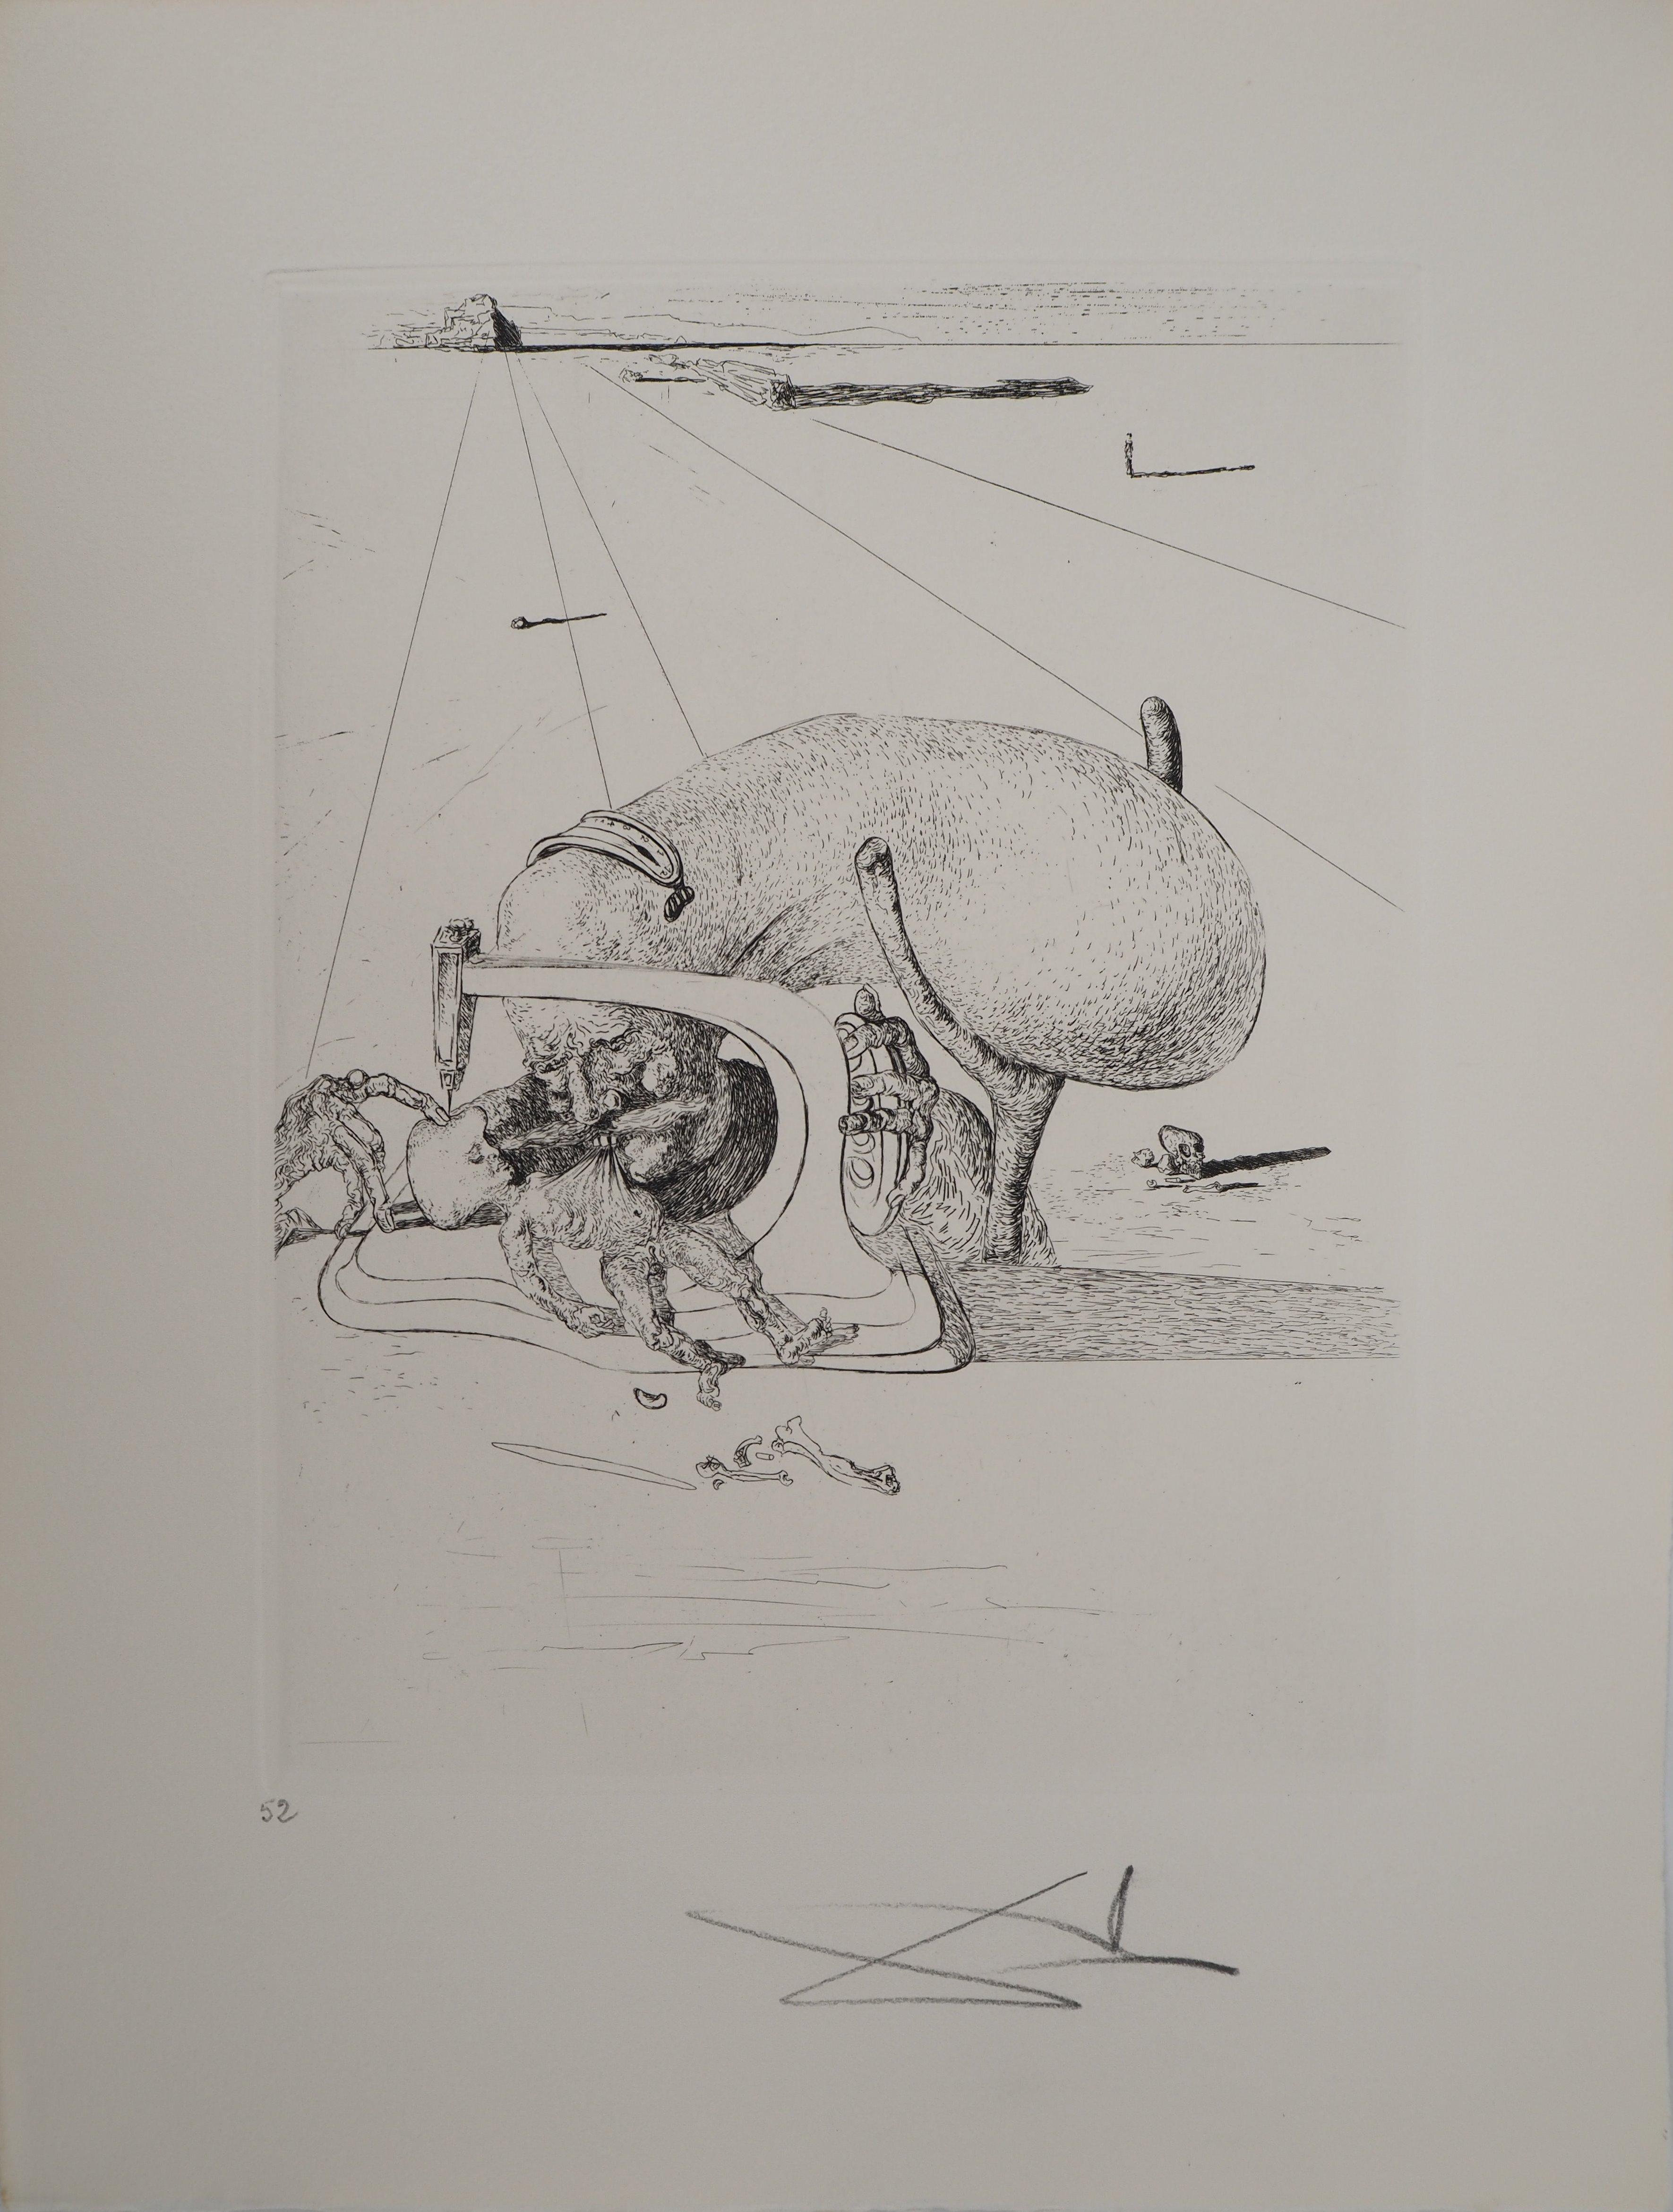 Salvador Dalí Abstract Print - Maldoror : Allegory of Time & Aging - Original Etching, HANDSIGNED (Field #34-2)